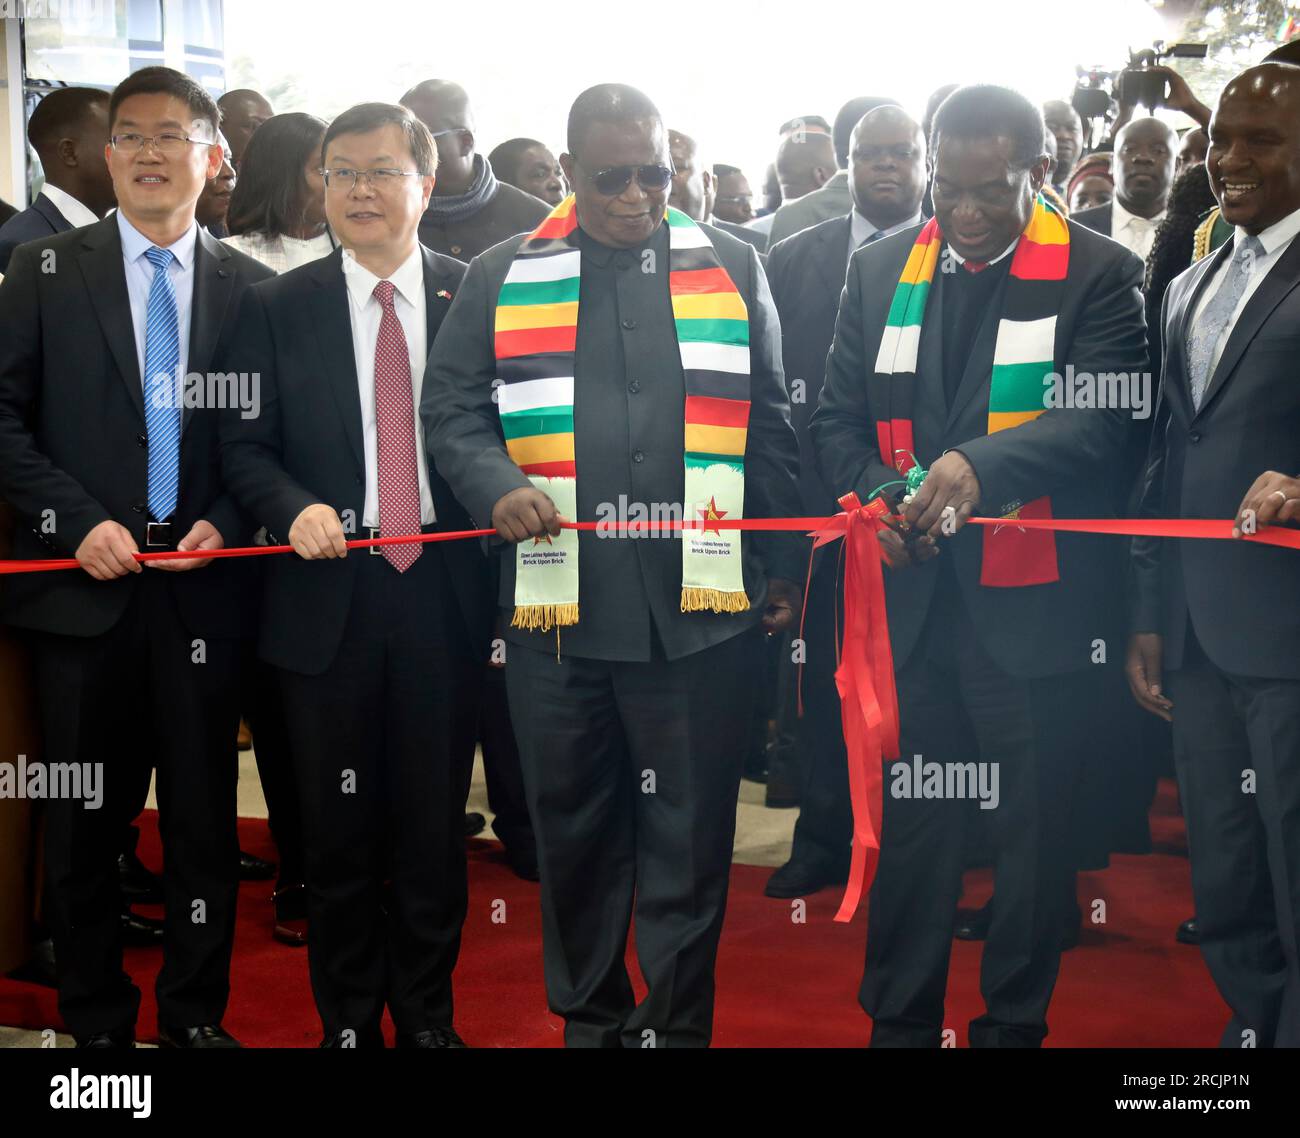 (230715) -- HARARE, July 15, 2023 (Xinhua) -- Zimbabwean President Emmerson Mnangagwa (2nd R, front) cuts the ribbon to commission the new Chinese-funded expanded terminal at Robert Gabriel Mugabe International Airport in Harare, Zimbabwe, July 14, 2023. Mnangagwa said the airport has brought positive effects to the country's economy, 'including skills and technology transfer, as well as the creation of employment and empowerment opportunities.'The project, expected to increase the airport's holding capacity to 6 million people per annum from 2.5 million when all is accomplished, consists of a Stock Photo